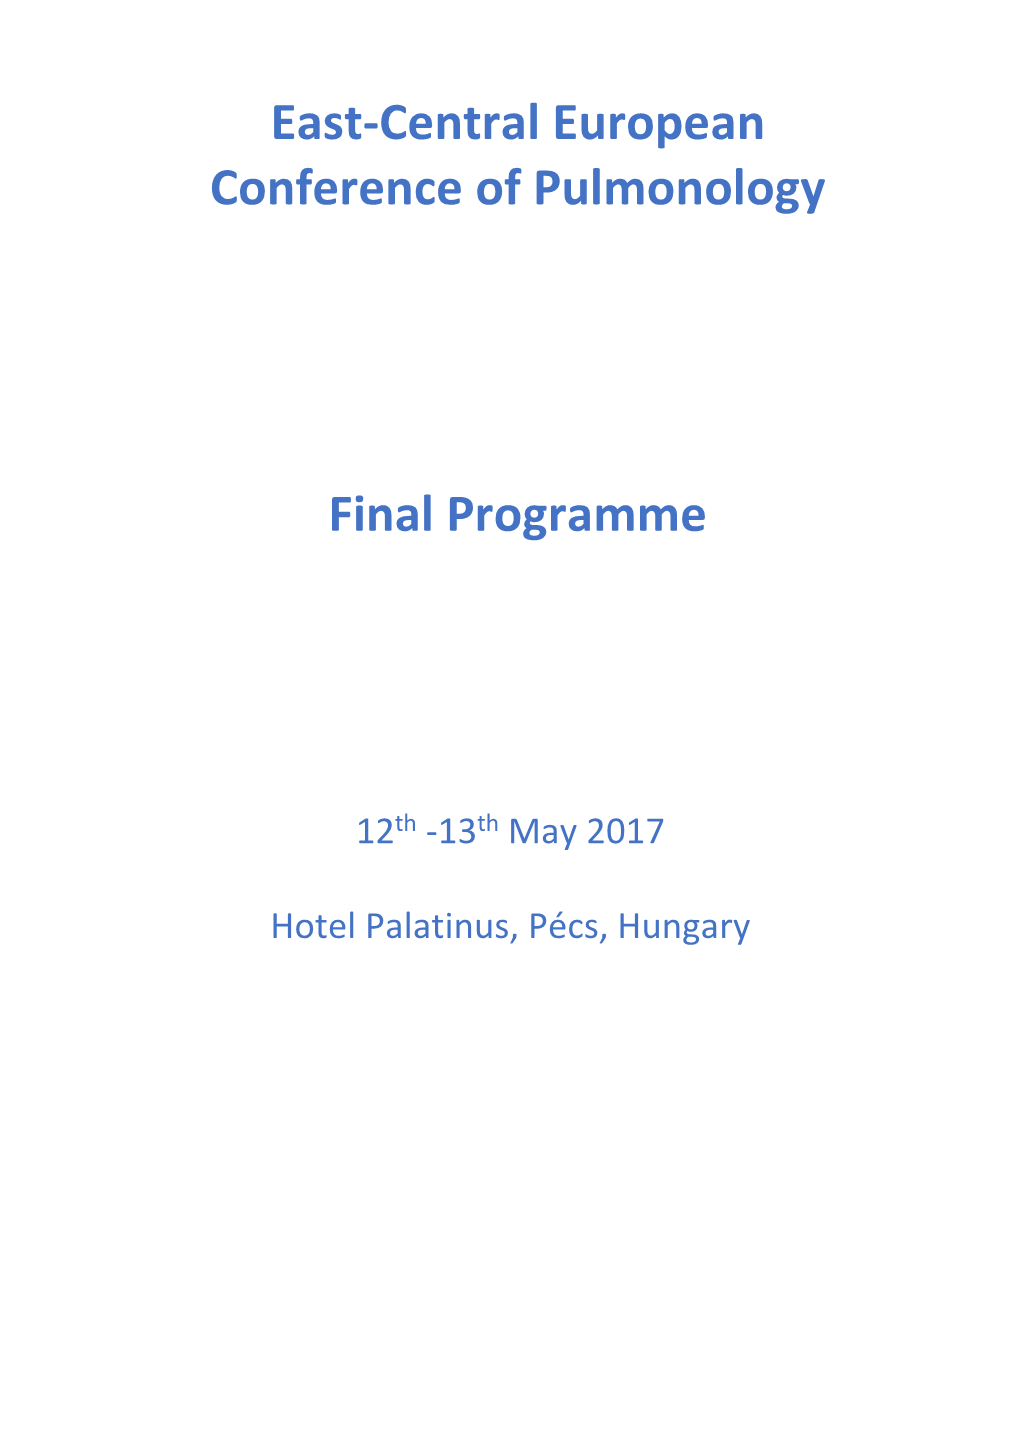 East-Central European Conference of Pulmonology Final Programme